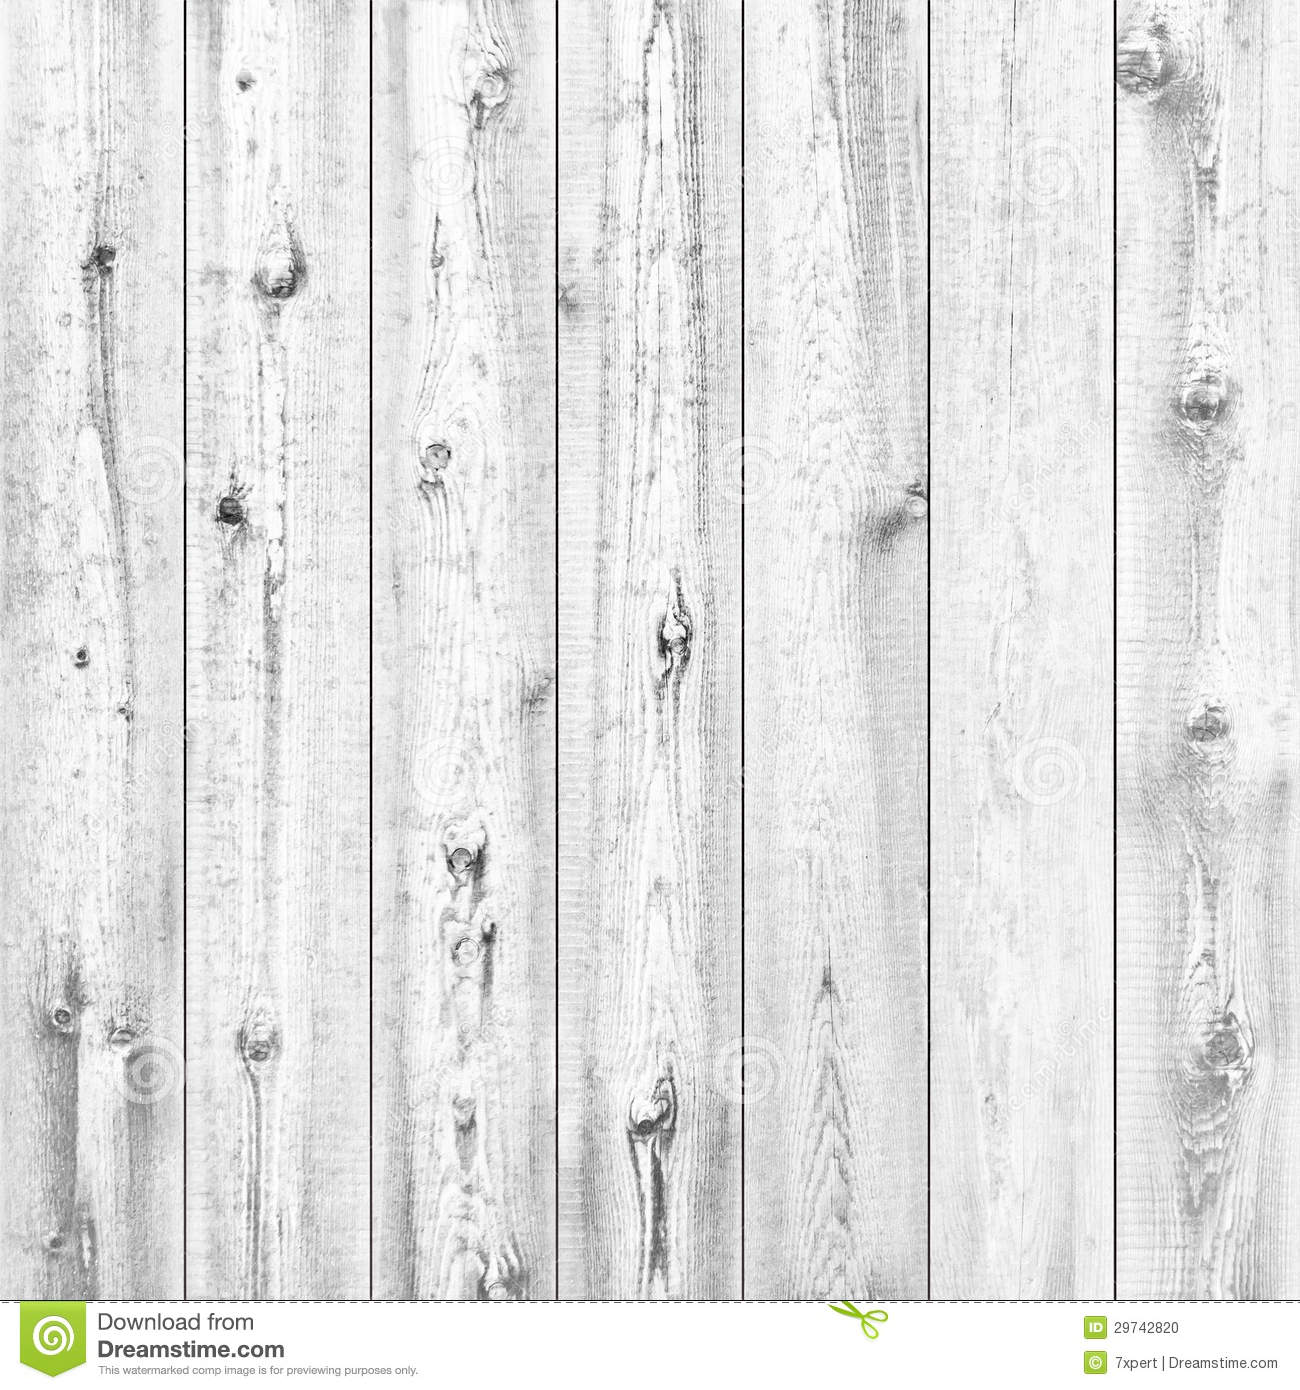 Black And White Wood Texture Stock Photo   Image  29742820